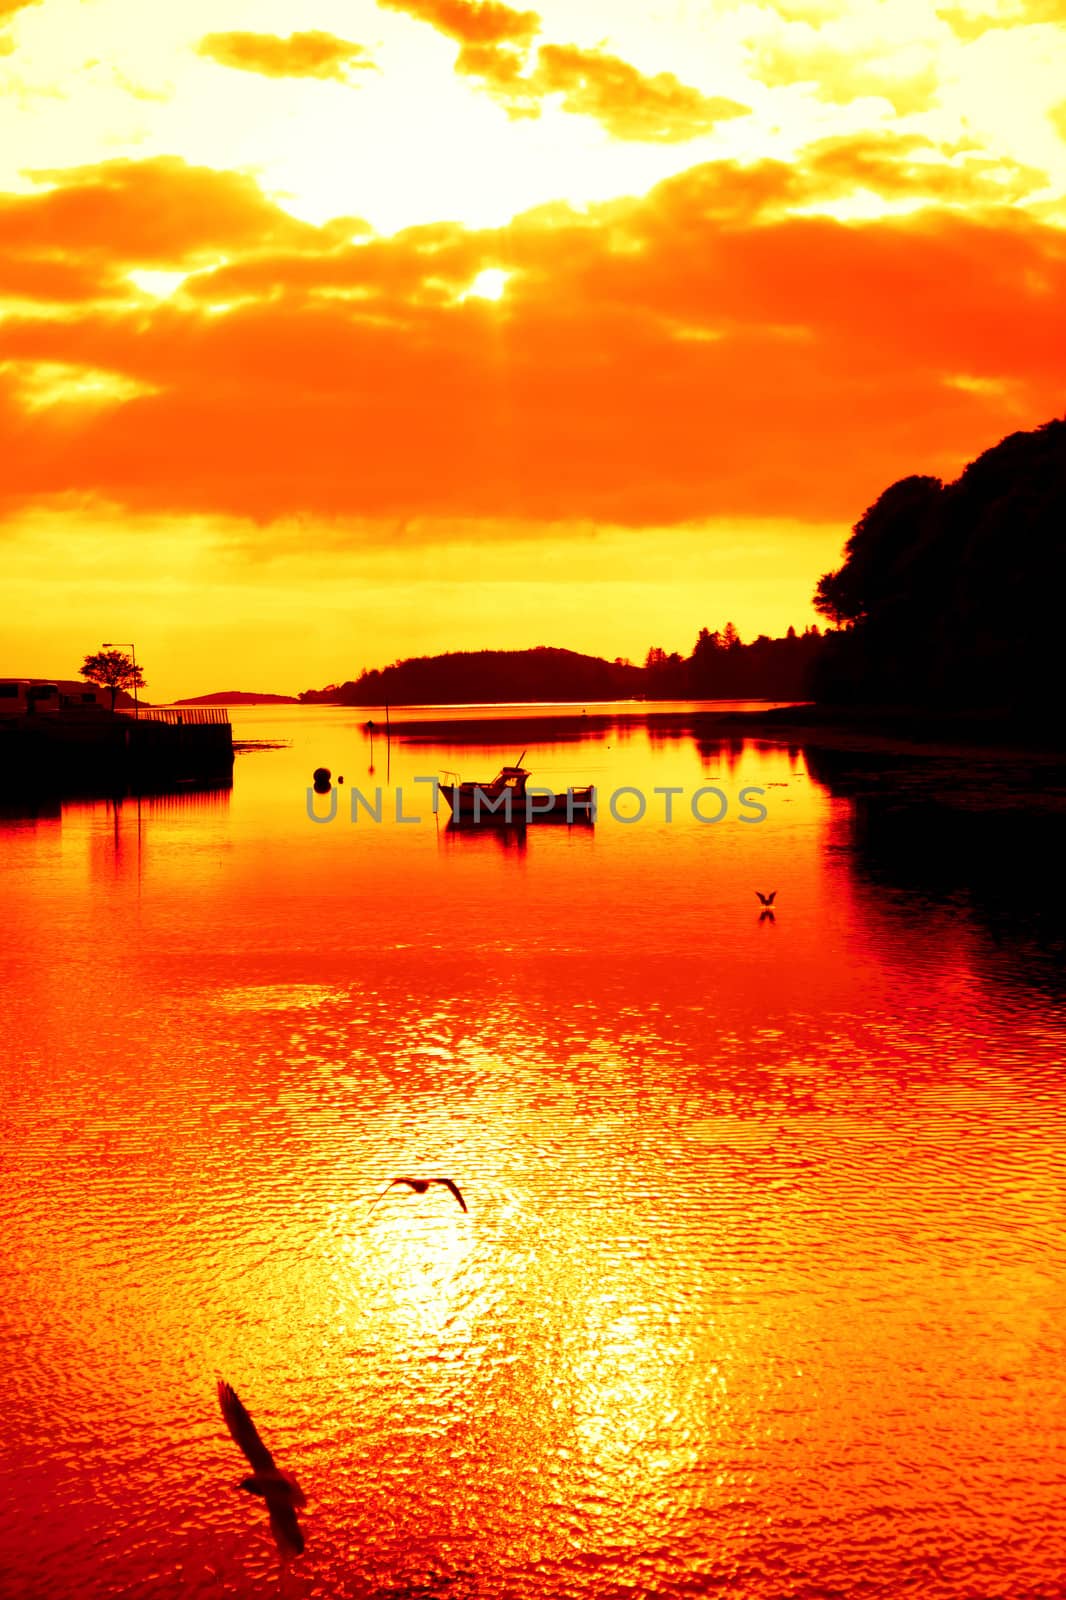 hot red silhouette of boat and birds at sunset by morrbyte